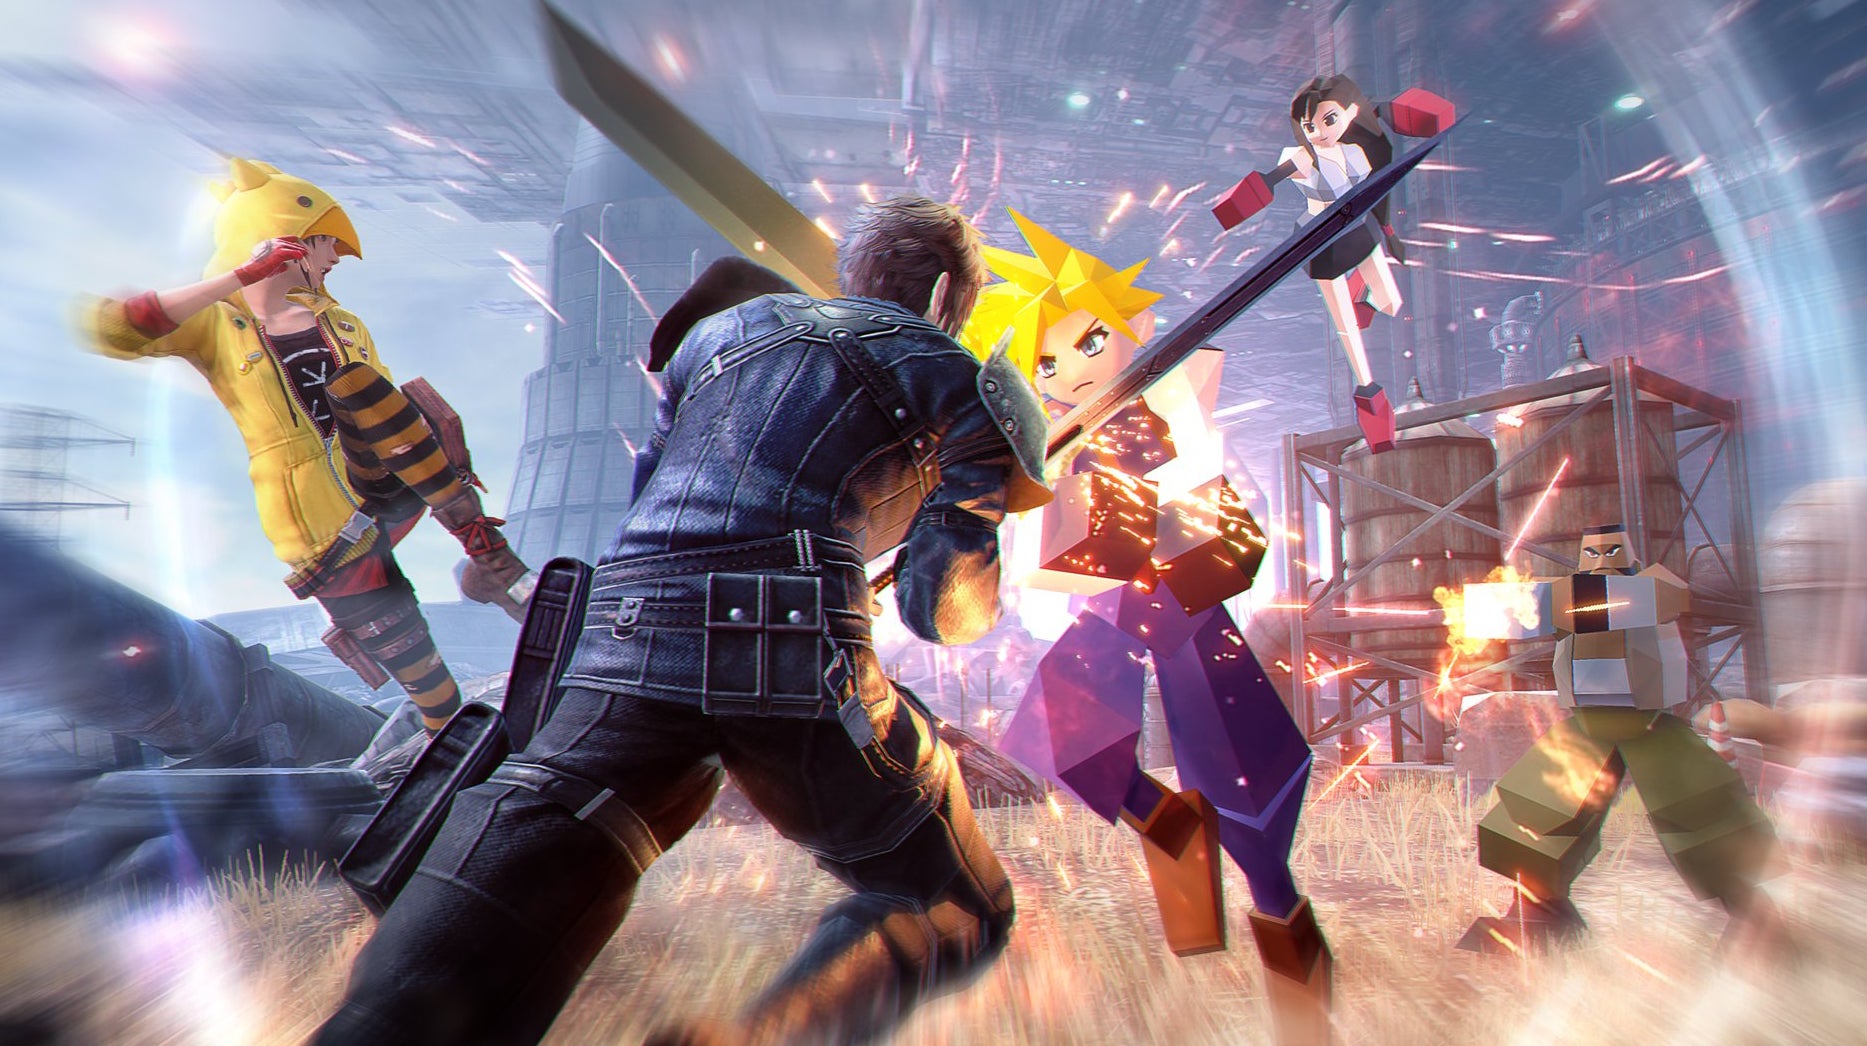 Image for Polygon characters coming to Final Fantasy 7 The First Soldier battle royale